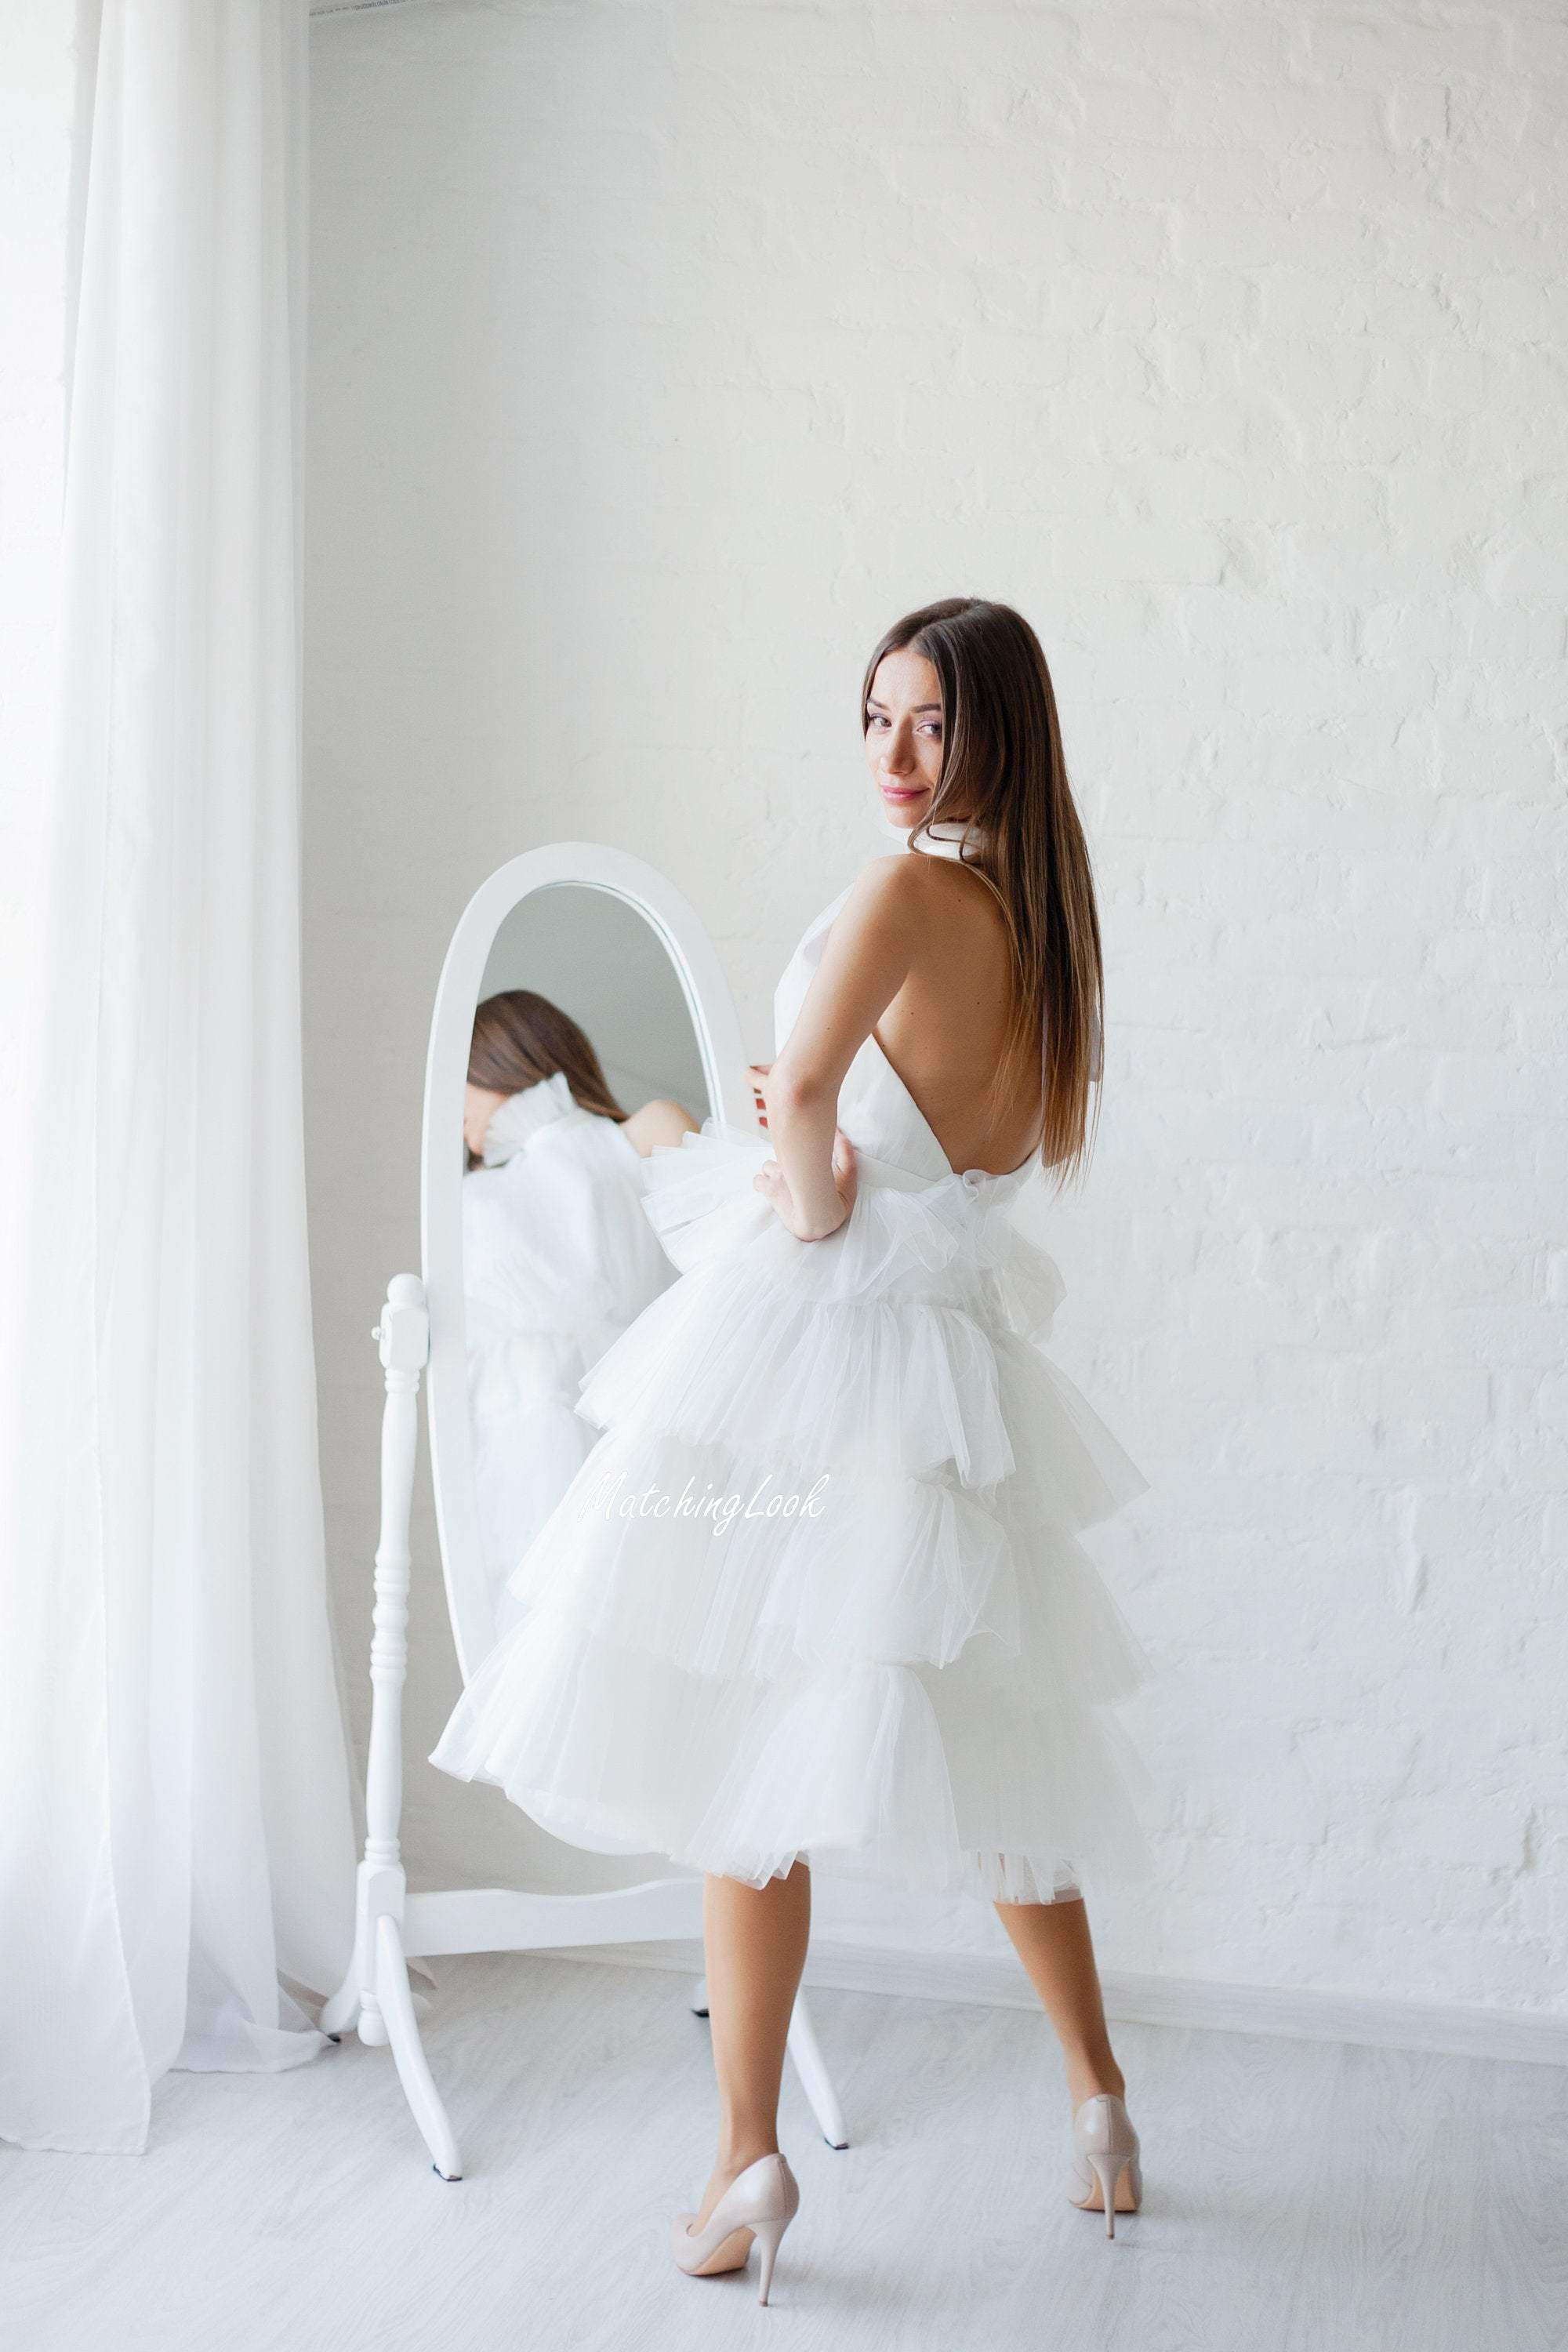 Matchinglook White Tulle Dress, White Bridesmaids Formal Halter Dress, Tulle Cocktail Dress 4 US / Gold